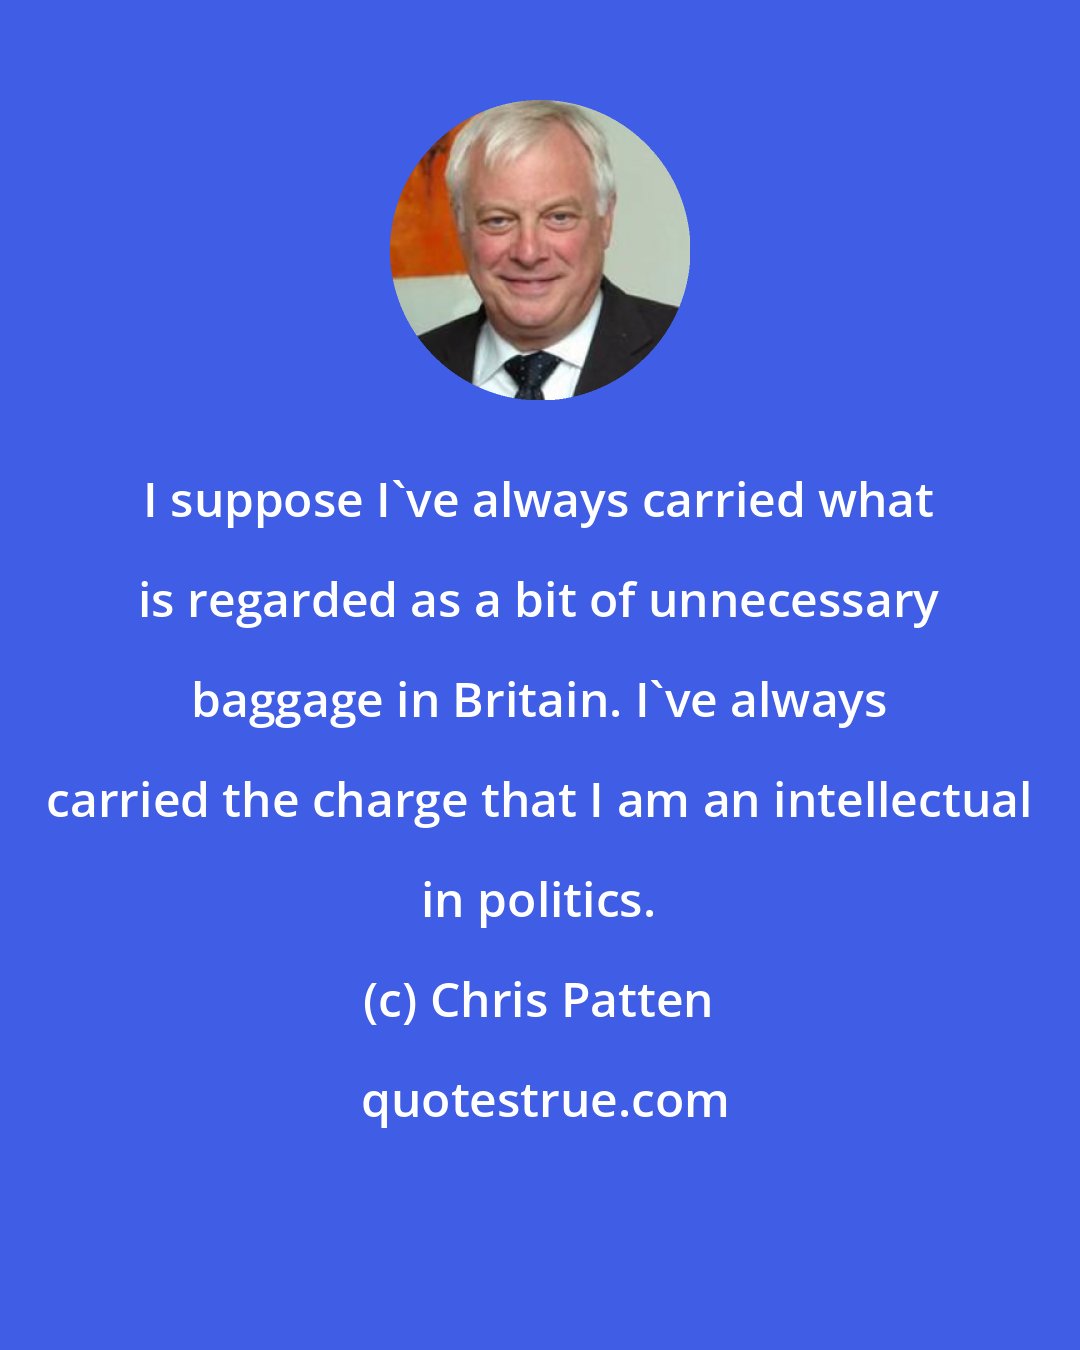 Chris Patten: I suppose I've always carried what is regarded as a bit of unnecessary baggage in Britain. I've always carried the charge that I am an intellectual in politics.